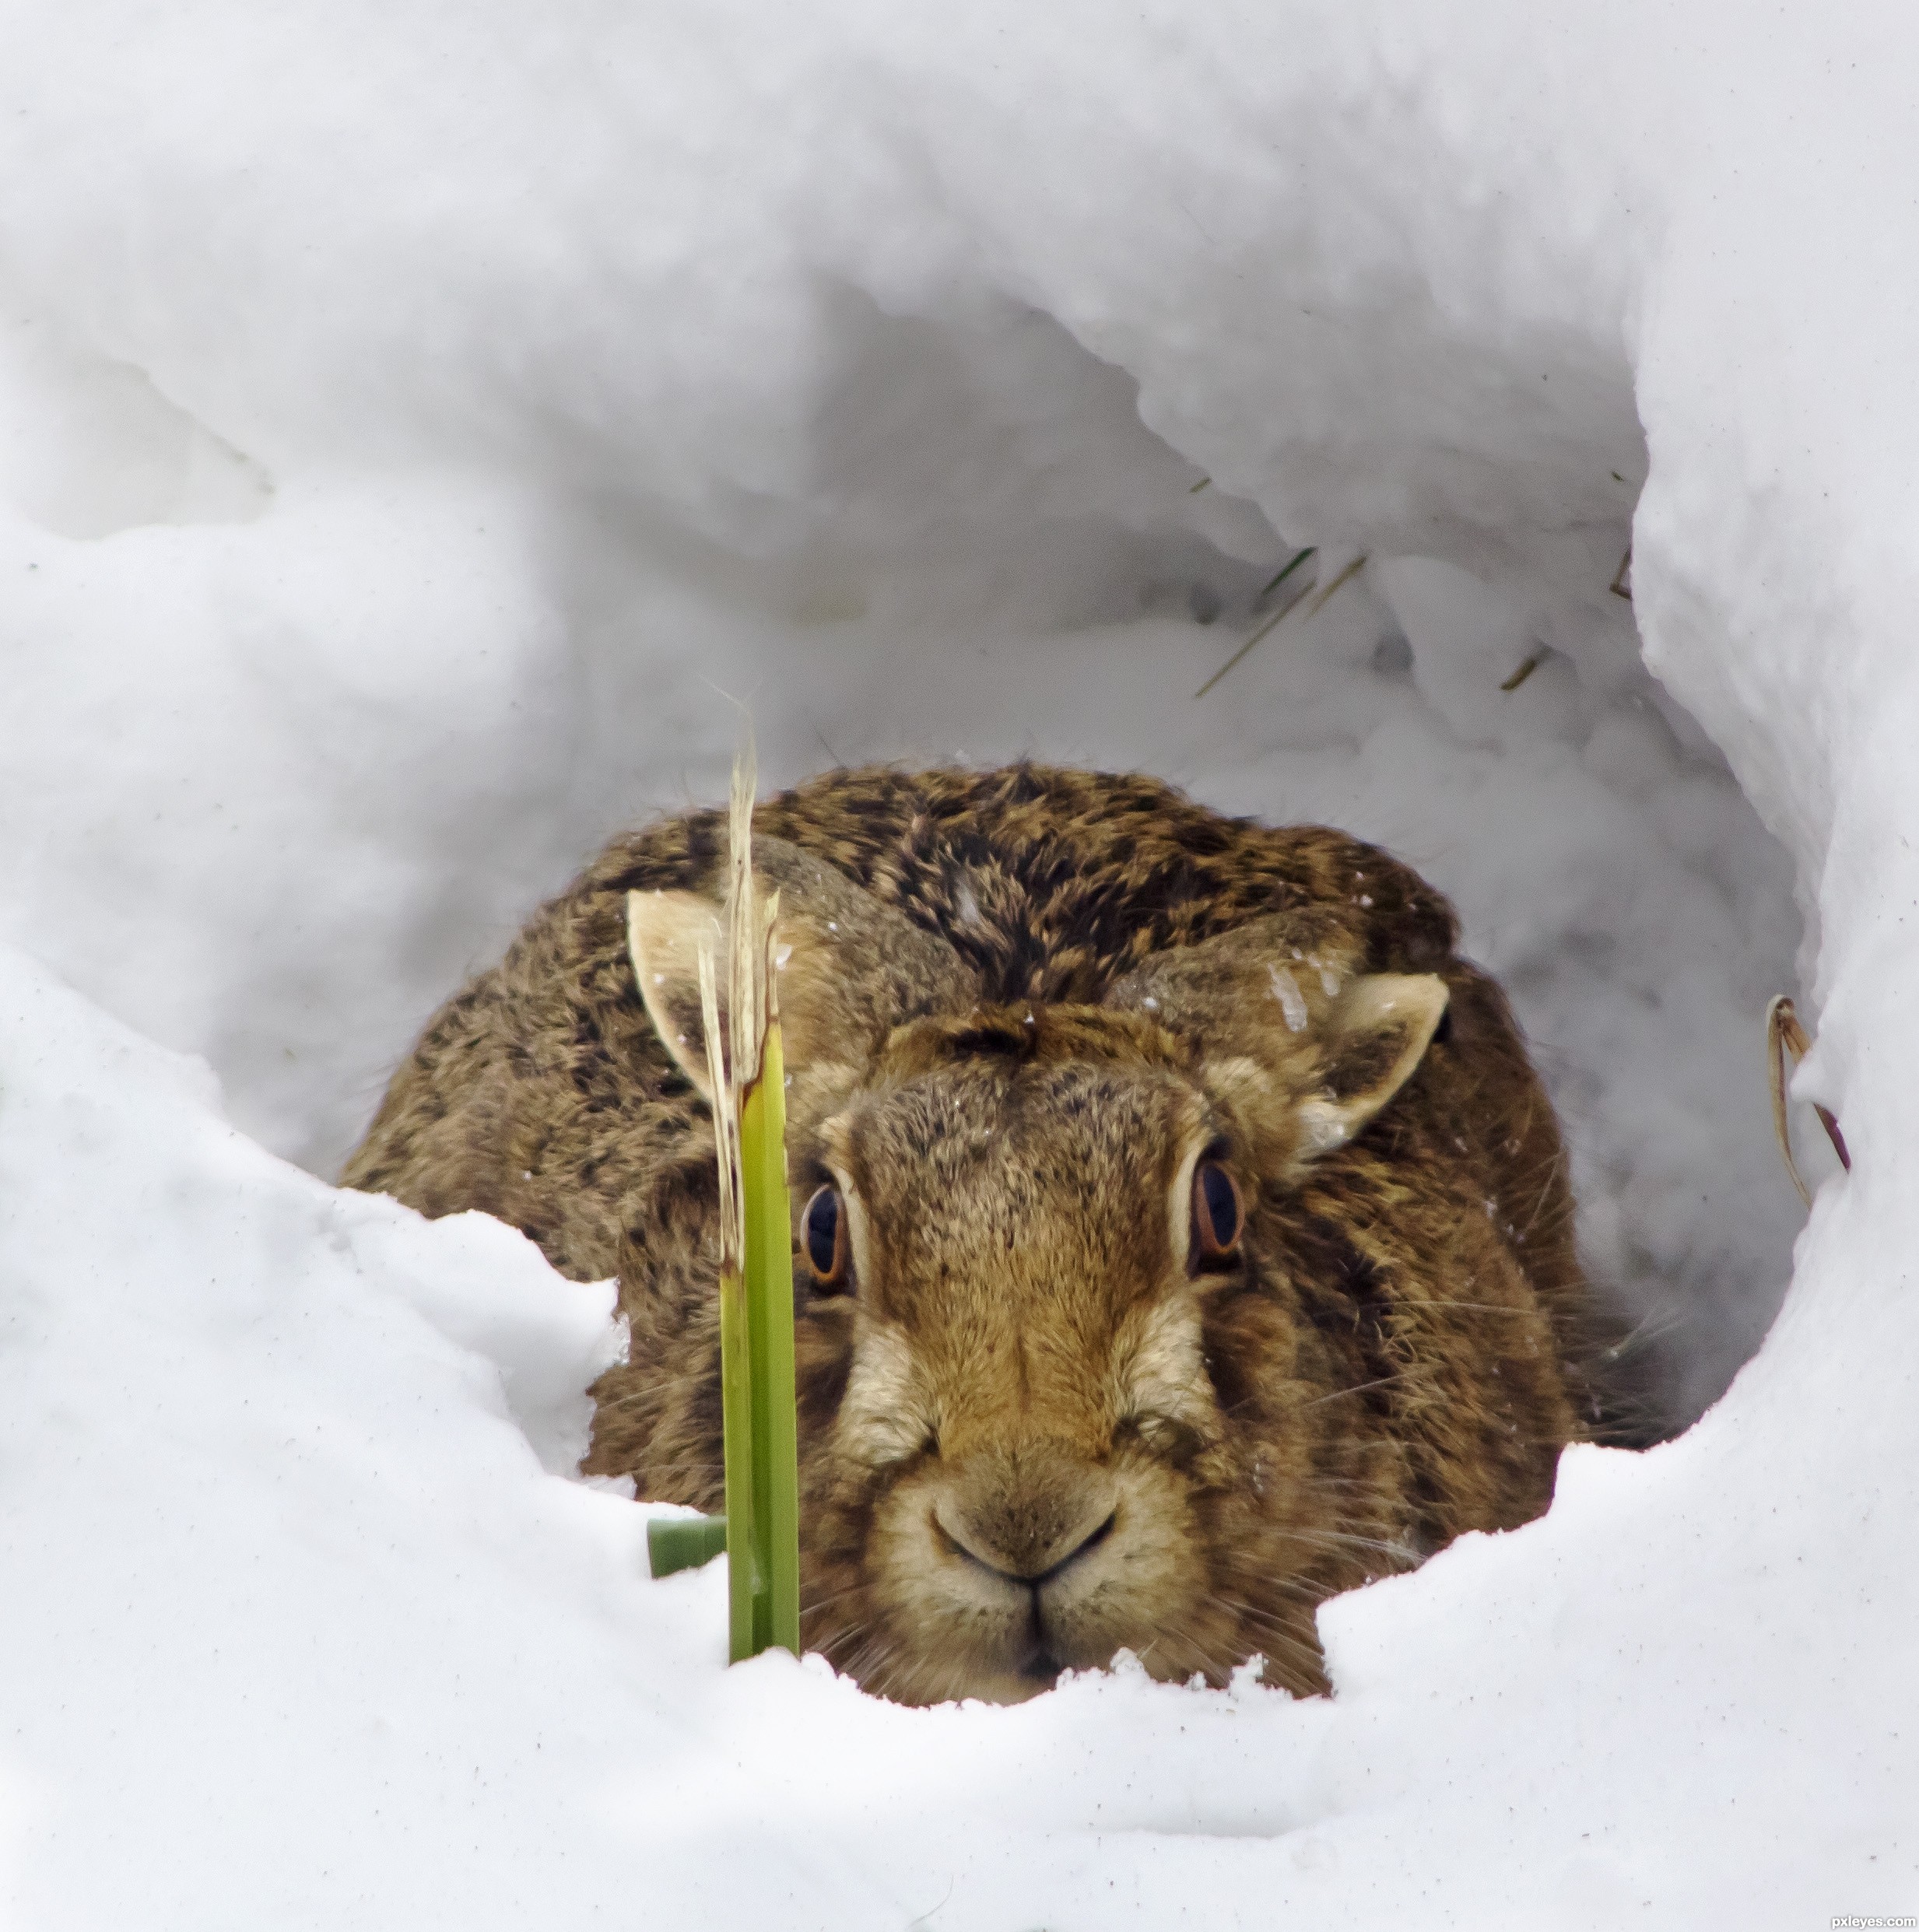 Wild Hare picture, by siduck68 for: wild animals 3 photography ...